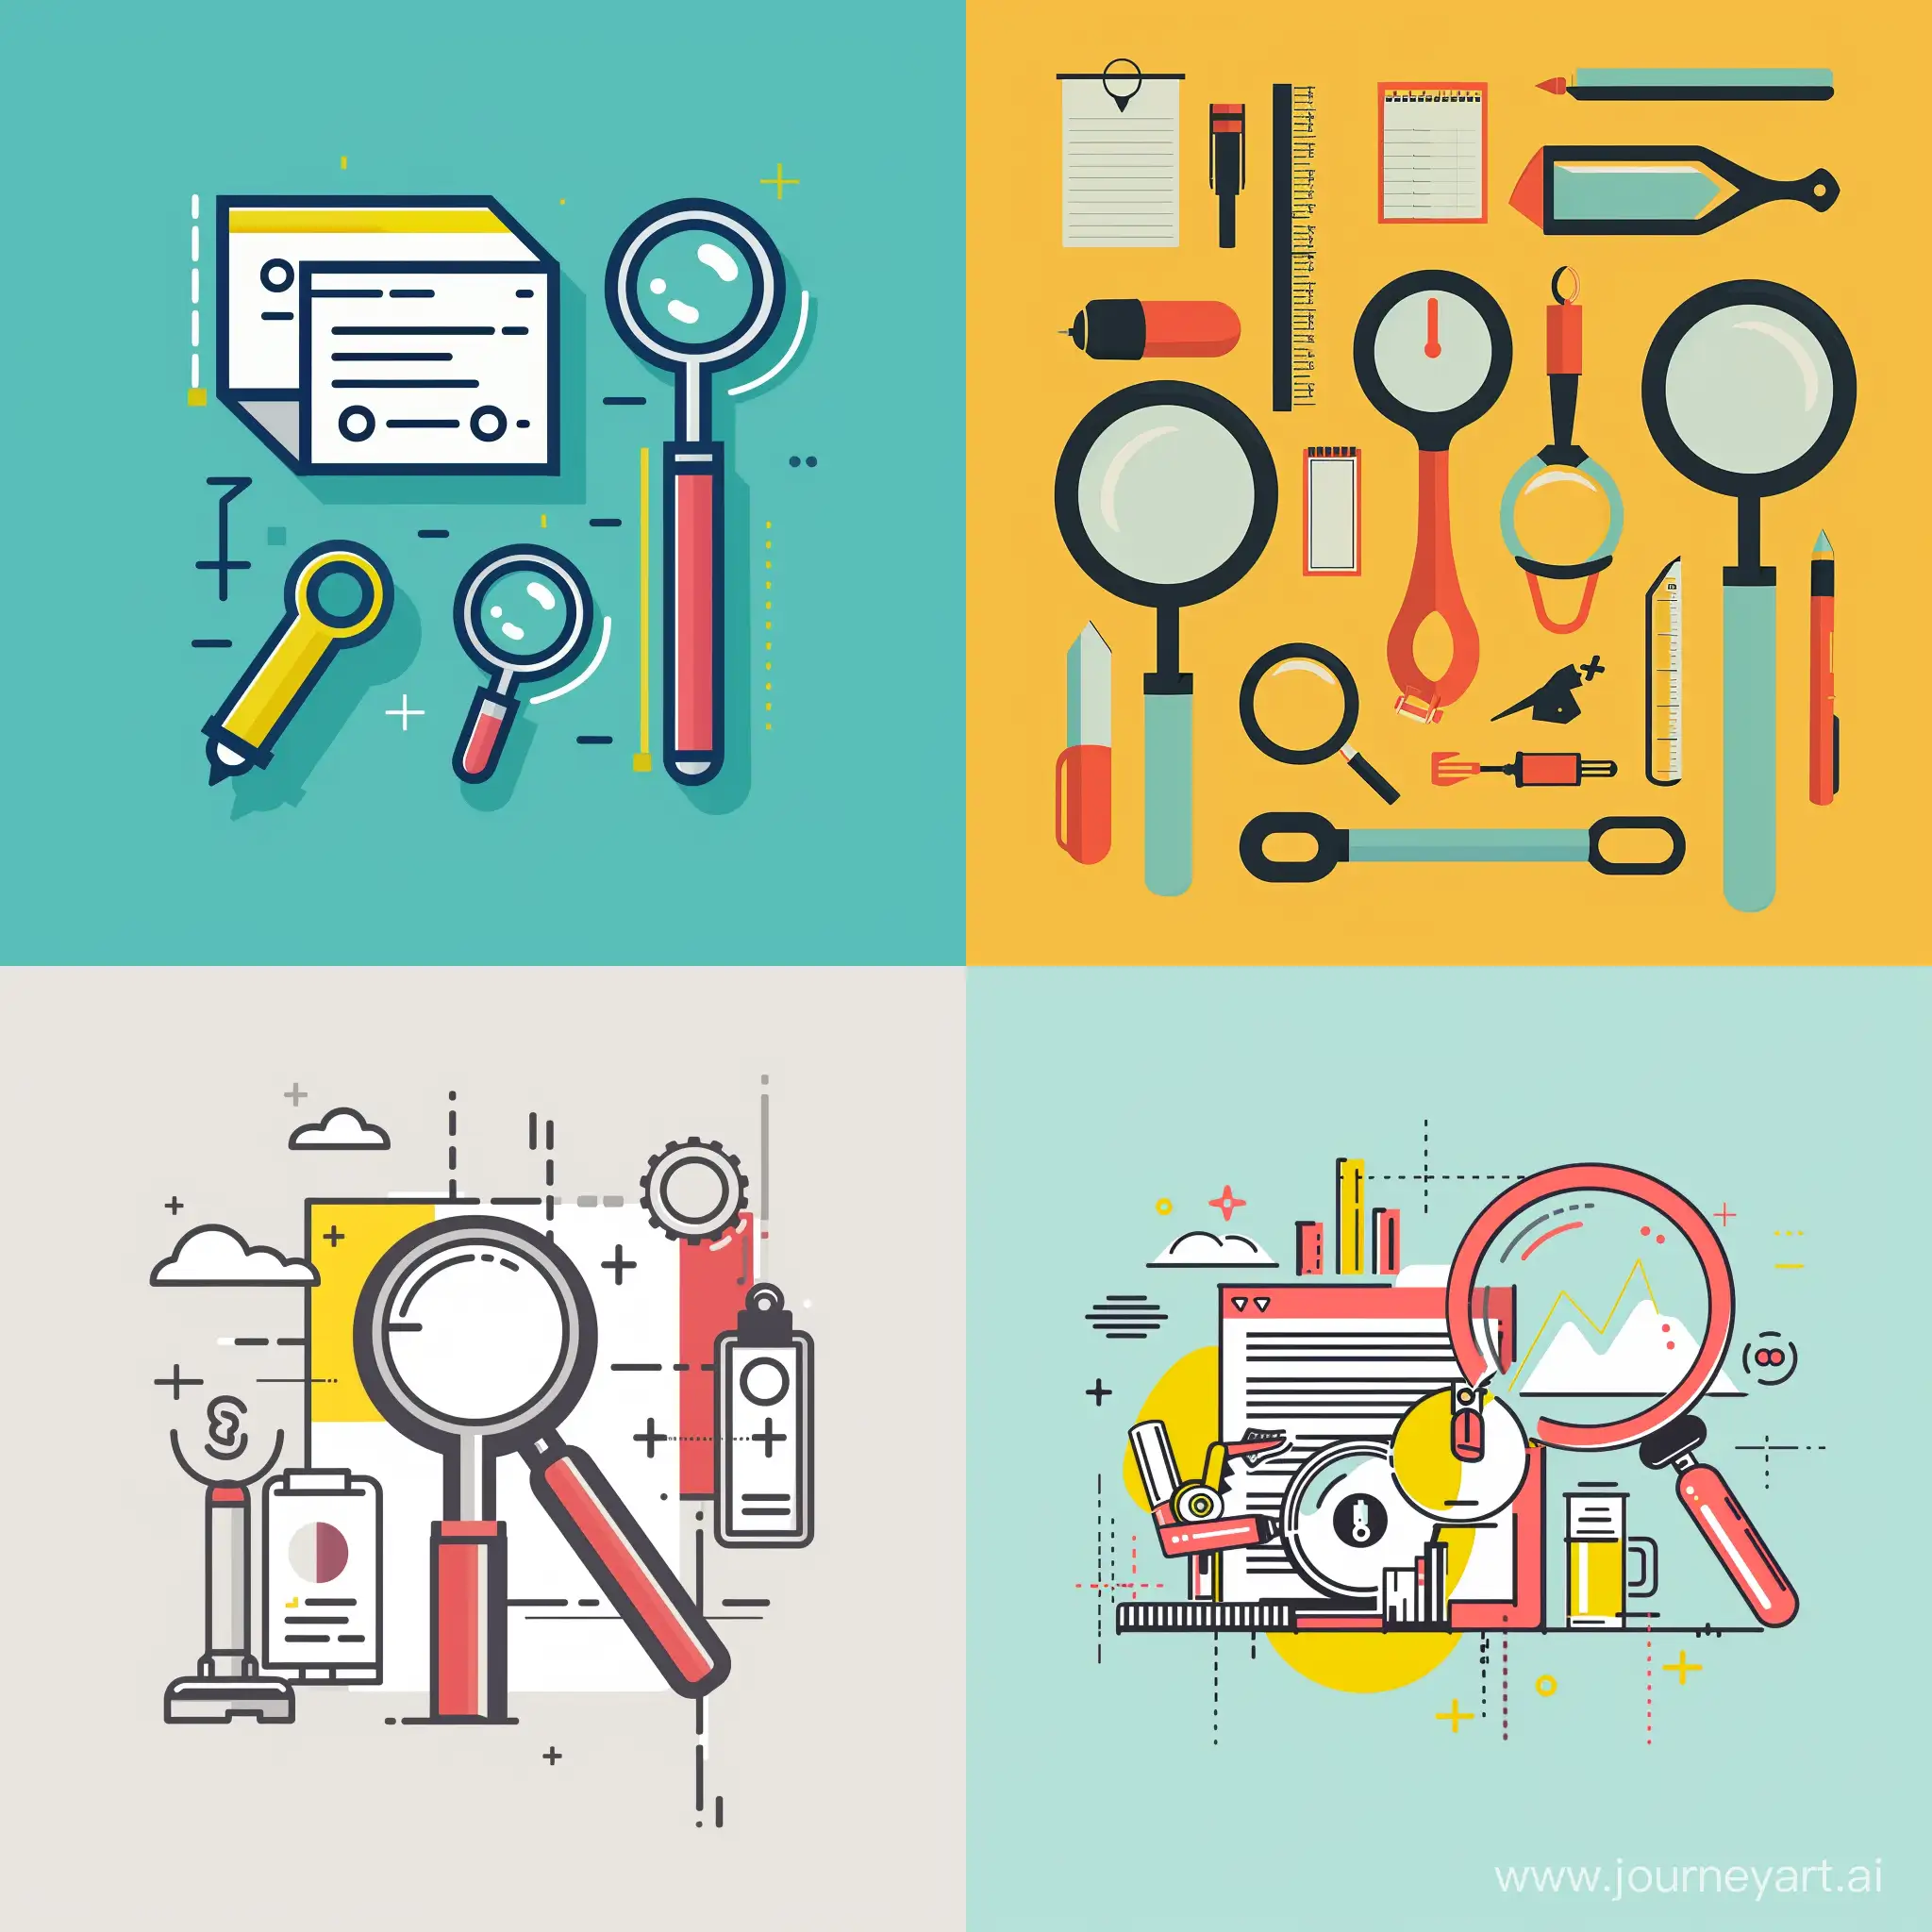 Minimal-Graphic-Illustration-of-Keyword-Research-Tools-on-Plain-Background